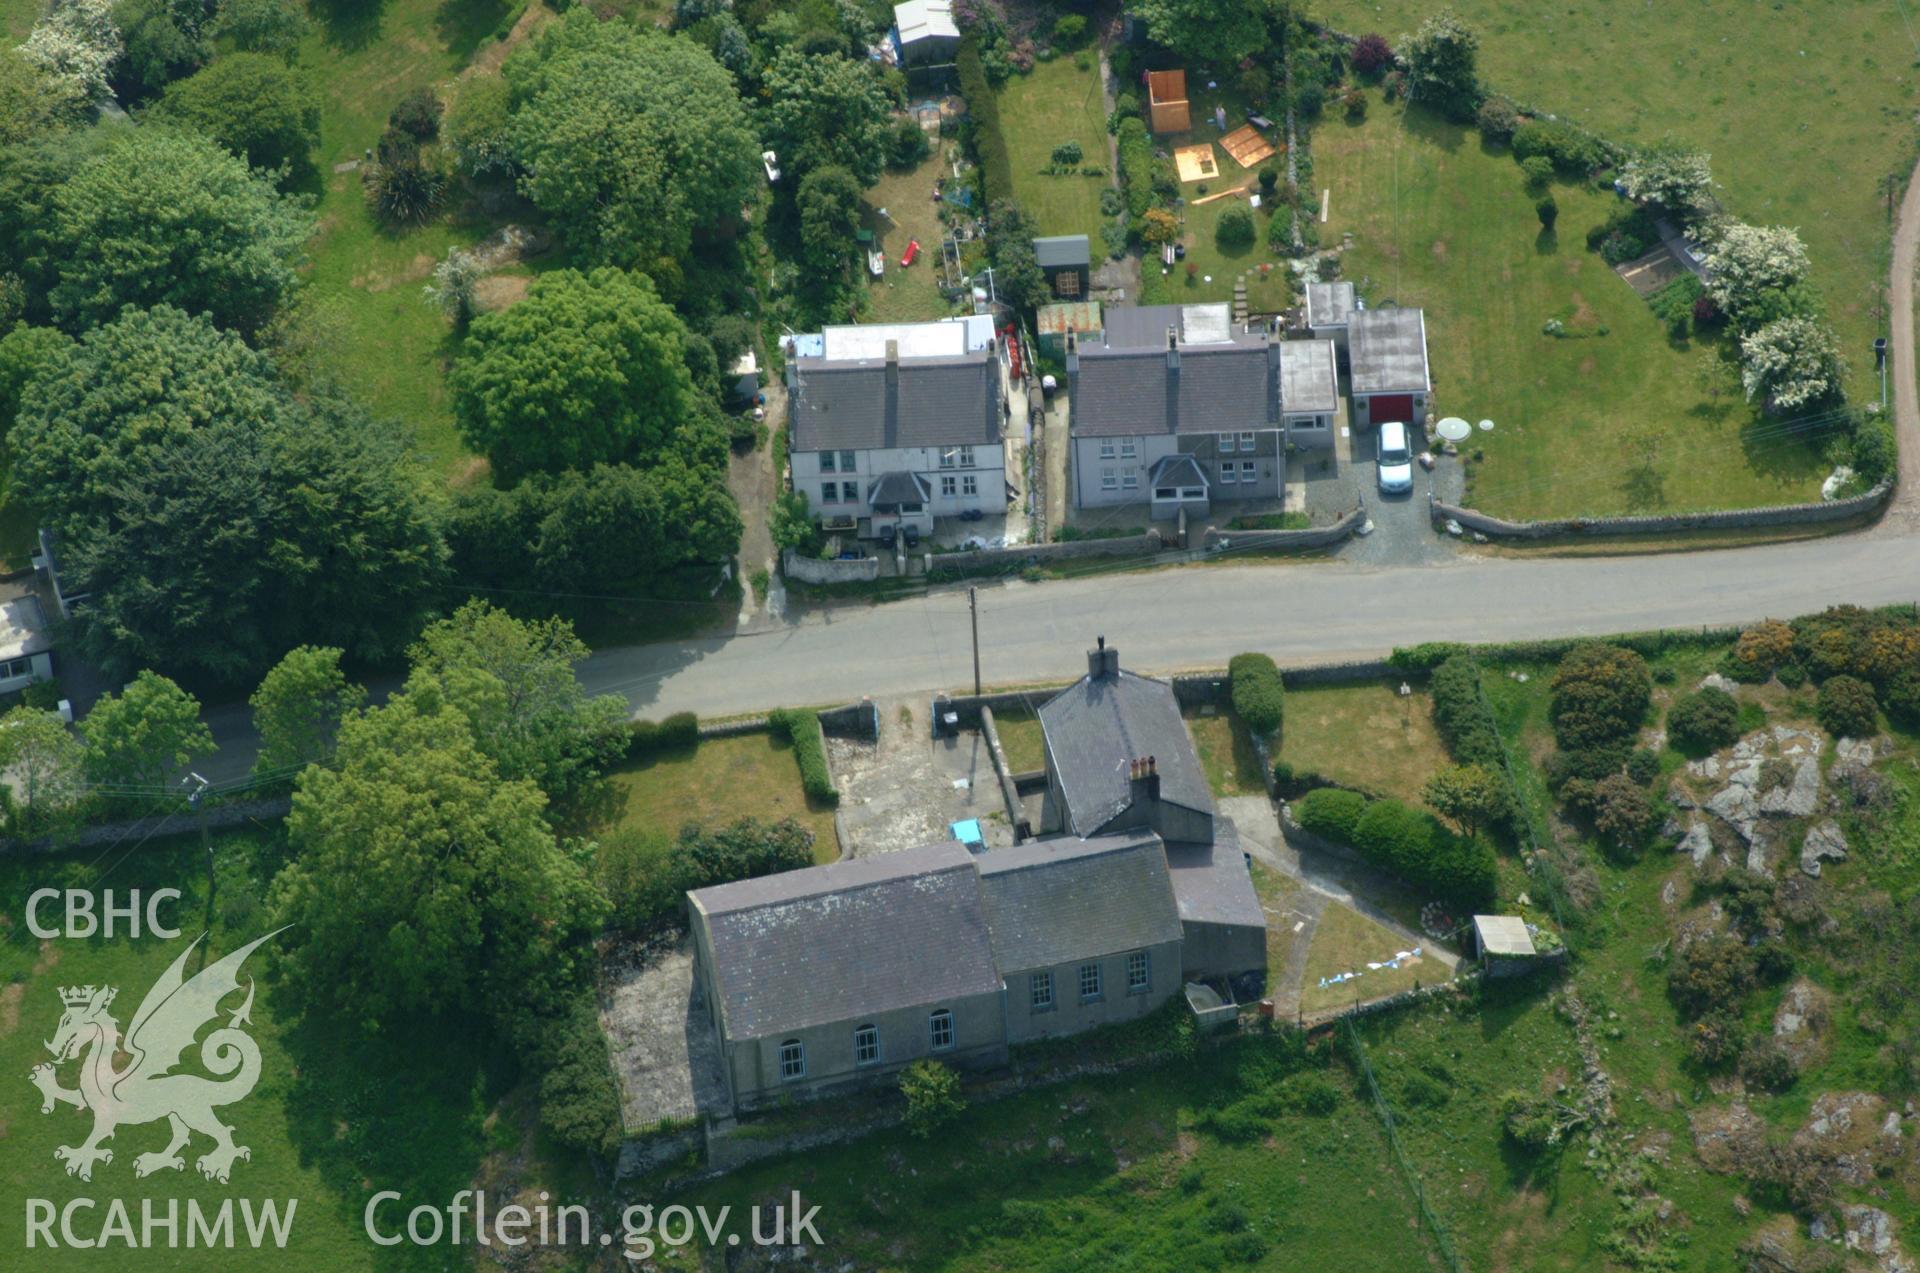 RCAHMW colour oblique aerial photograph of Seion Independent Chapel, Carregl-efn taken on 26/05/2004 by Toby Driver